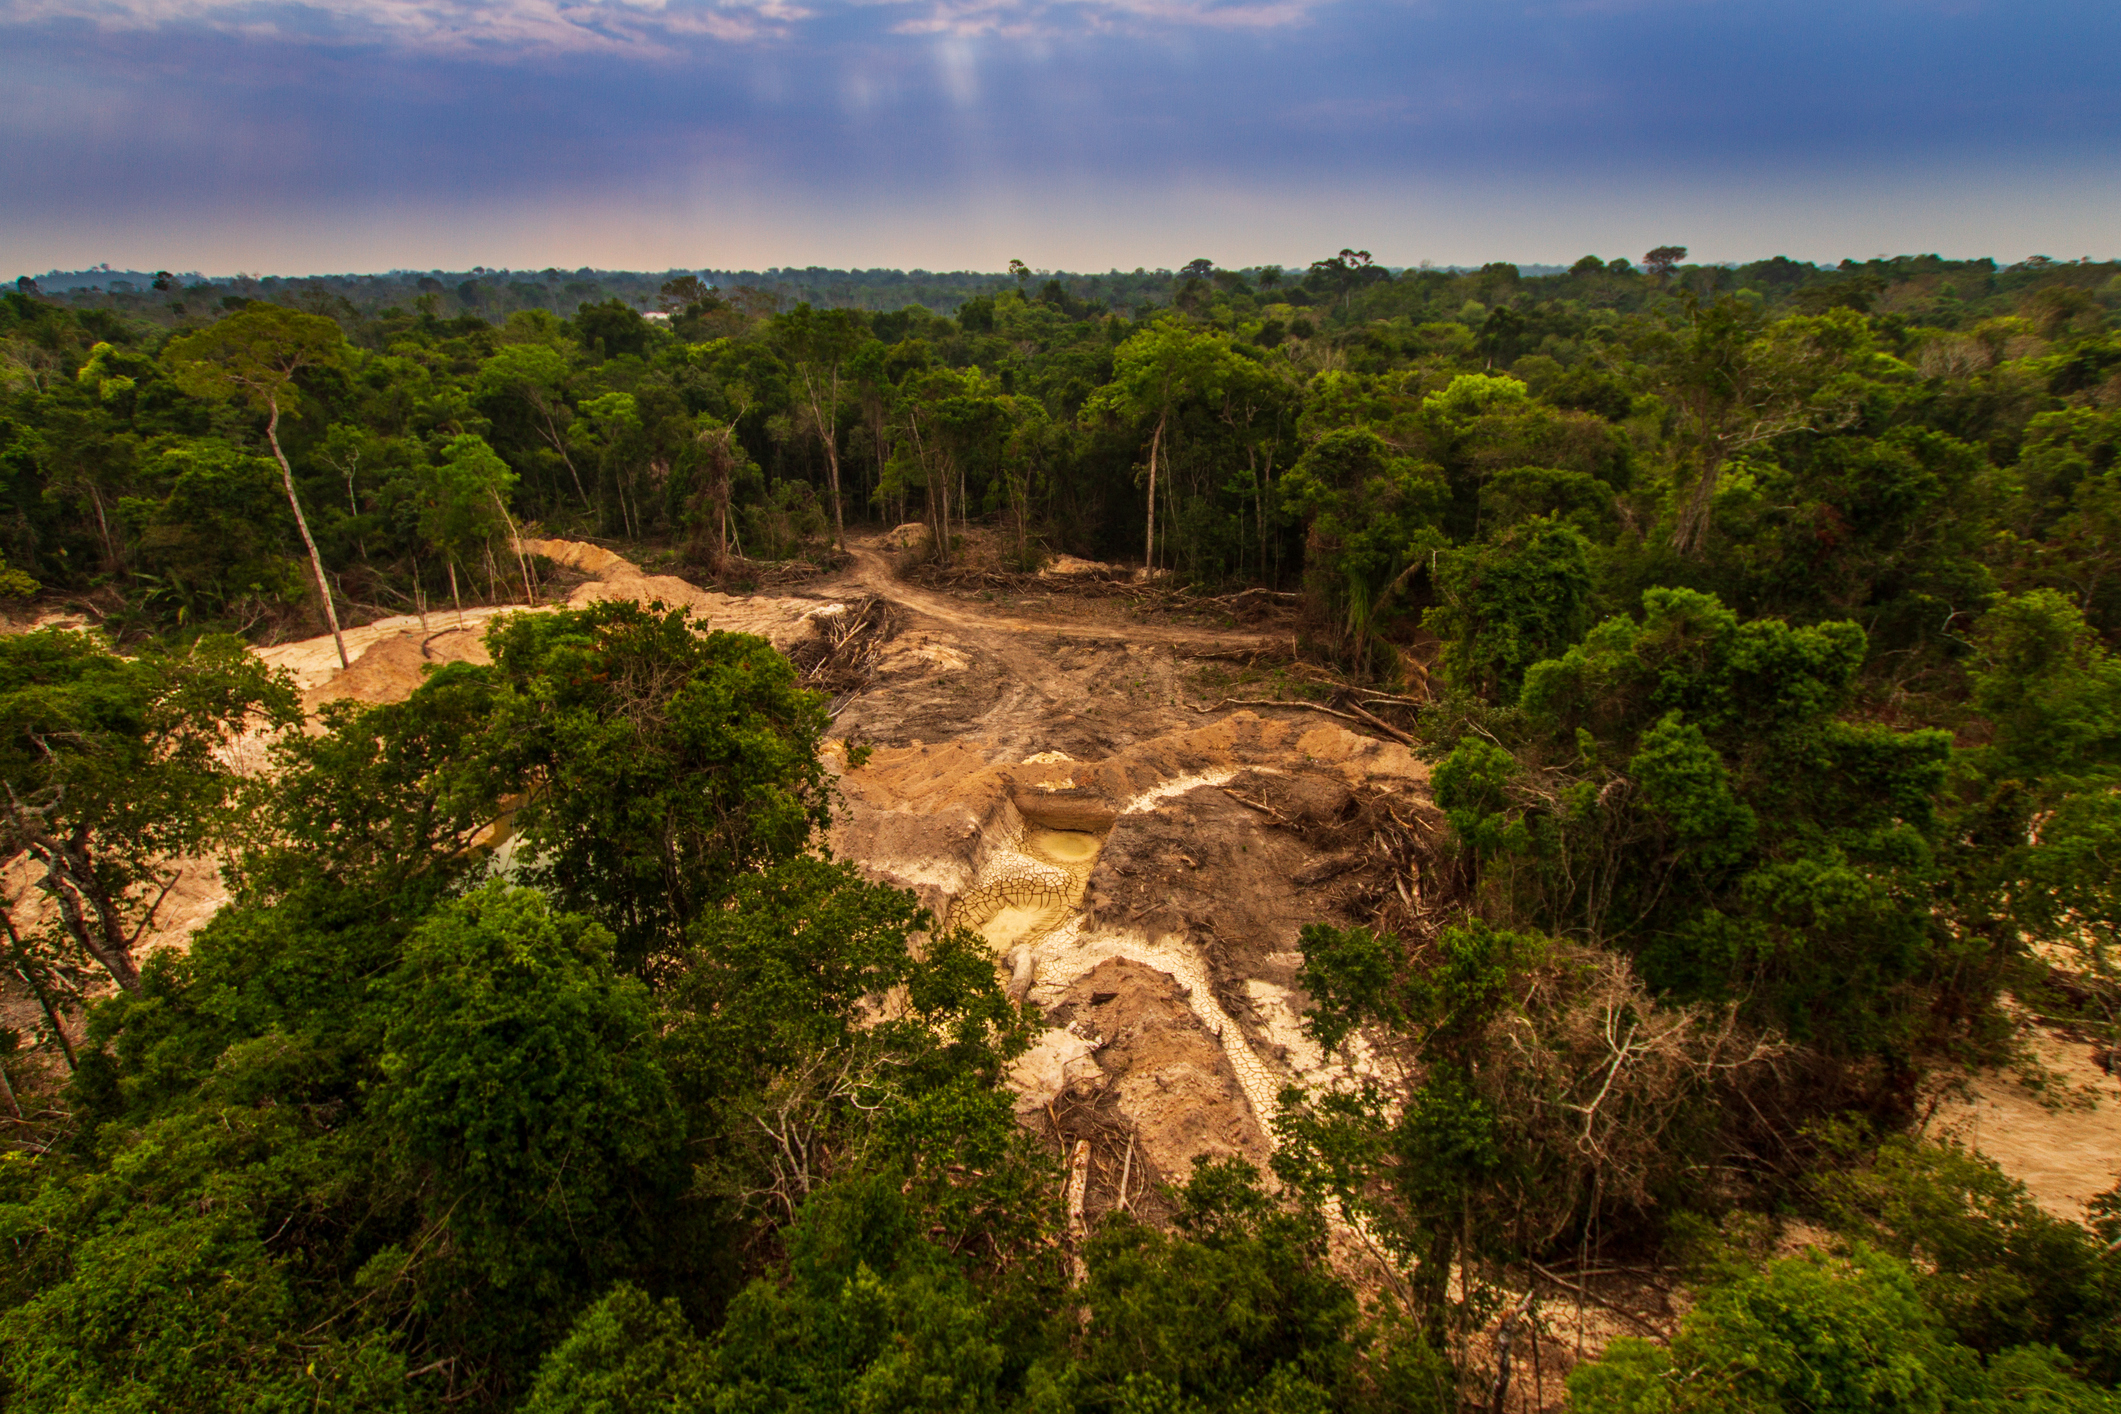 Illegal mining causes deforestation and river pollution in the Amazon rainforest near Menkragnoti Indigenous Land in Pará, Brazil. (Getty Images/iStockphoto&mdash;Marcio Isensee e Sá)